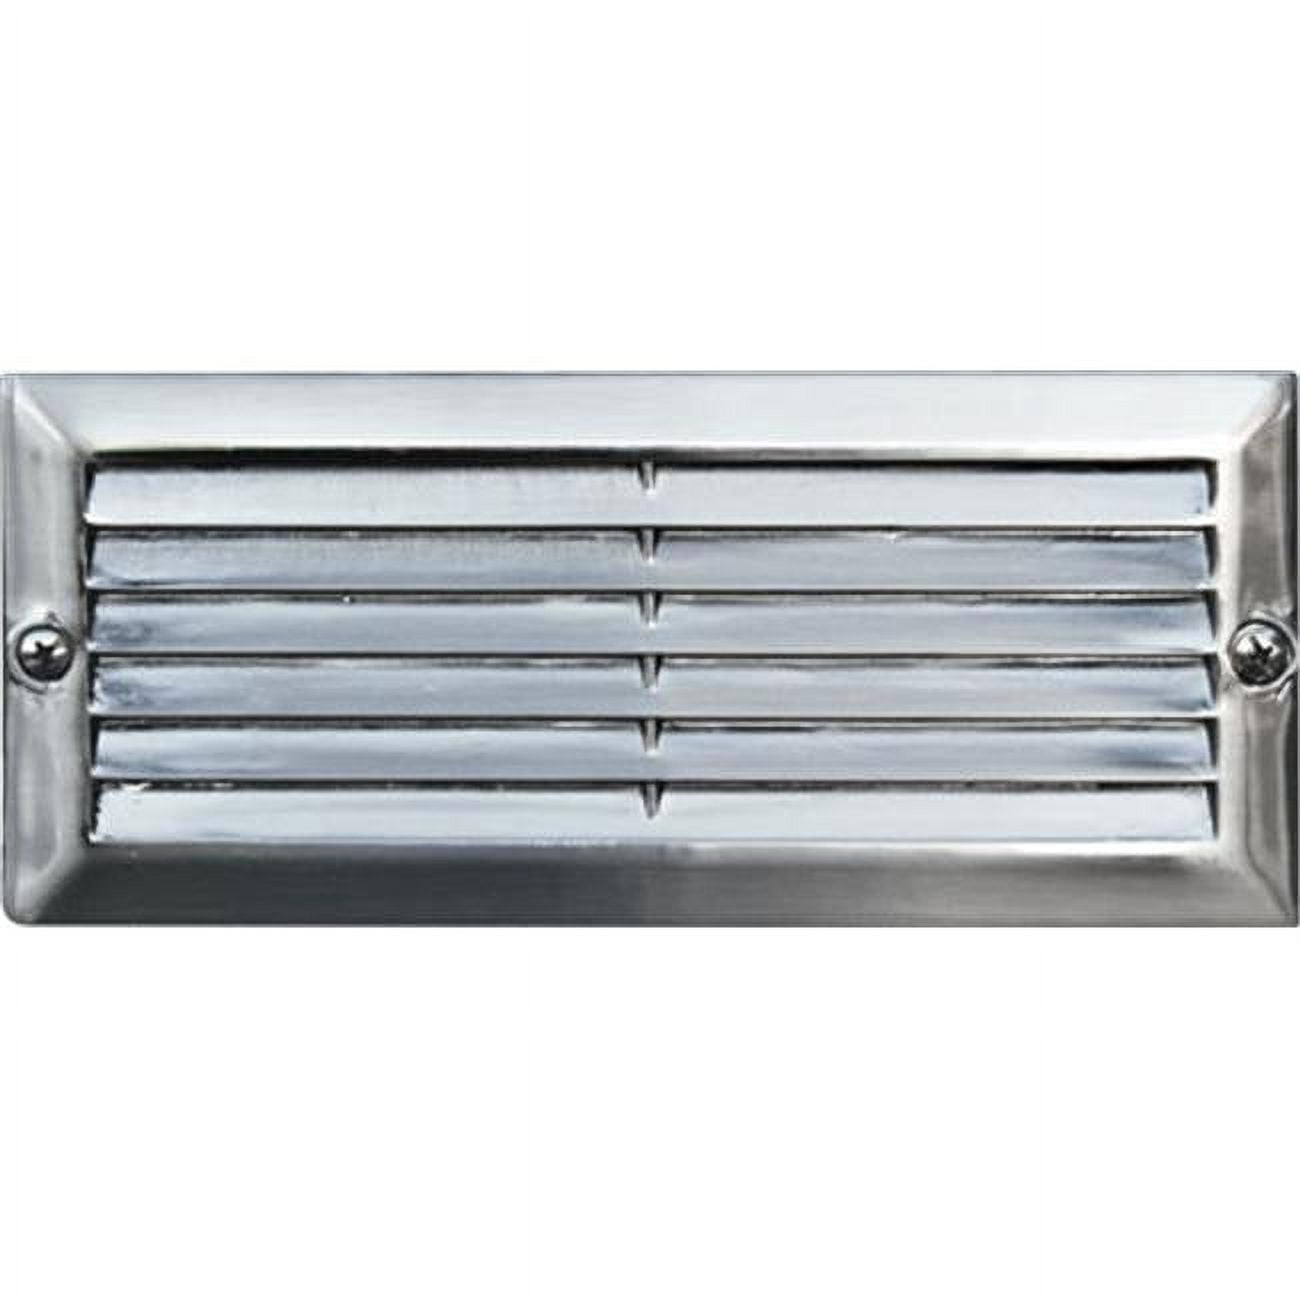 Picture of Dabmar Lighting LV600-SS Cast Aluminum Recessed Louvered Brick, Step & Wall Light, Electro-Plated Stainless Steel - 3.97 x 9.13 x 3.25 in.